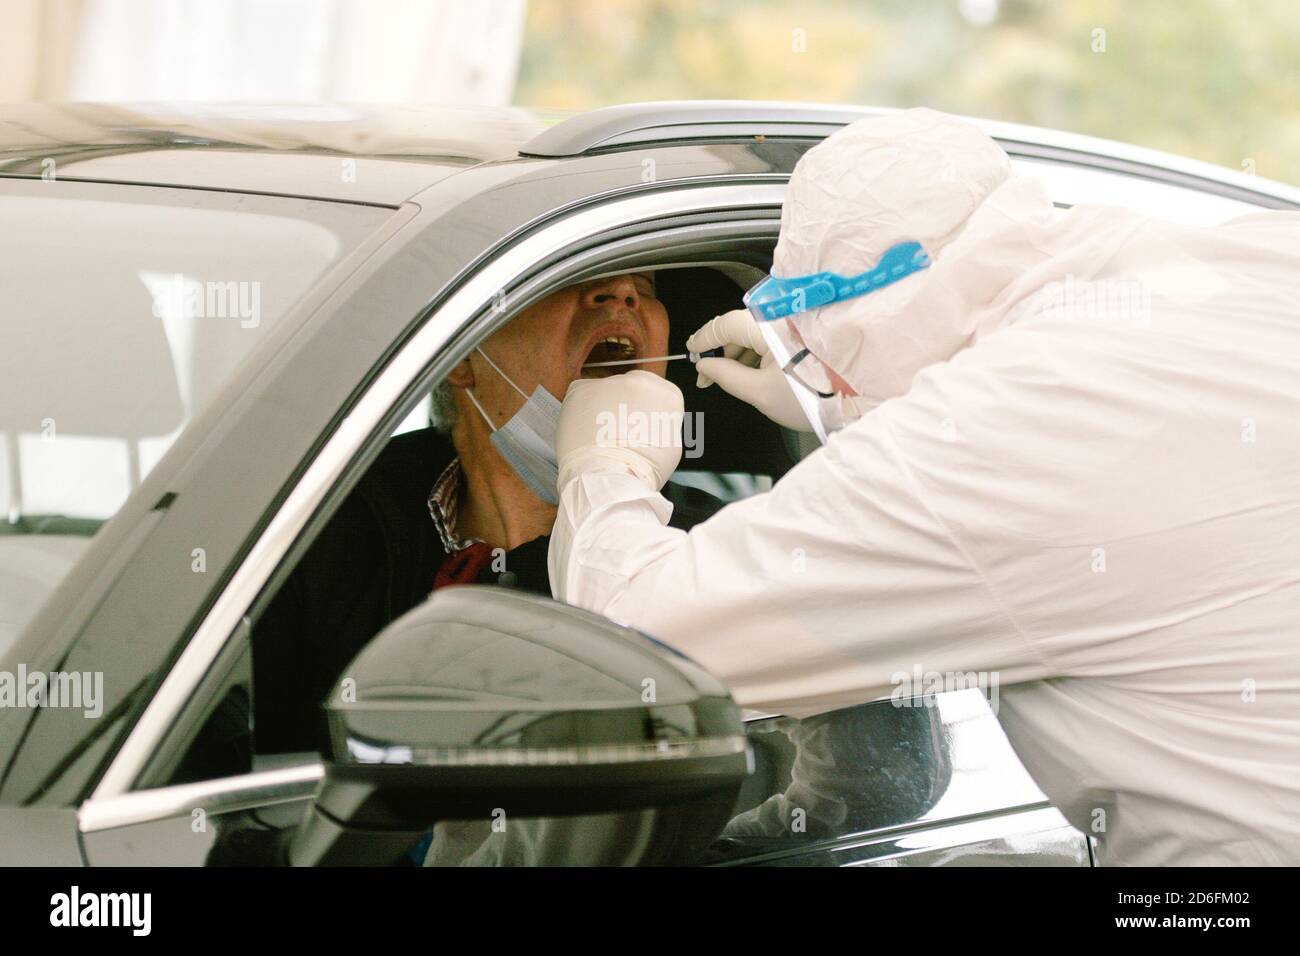 Dusseldorf, Germany. 16th Oct, 2020. A healthcare worker takes a sample from a driver at a drive-in test station in Dusseldorf, Germany, Oct. 16, 2020. New COVID-19 infections in Germany kept climbing and reached a new record with 7,334 cases within one day, bringing the total number to 348,557, the national disease control agency Robert Koch Institute (RKI) announced on Friday. Credit: Tang Ying/Xinhua/Alamy Live News Stock Photo